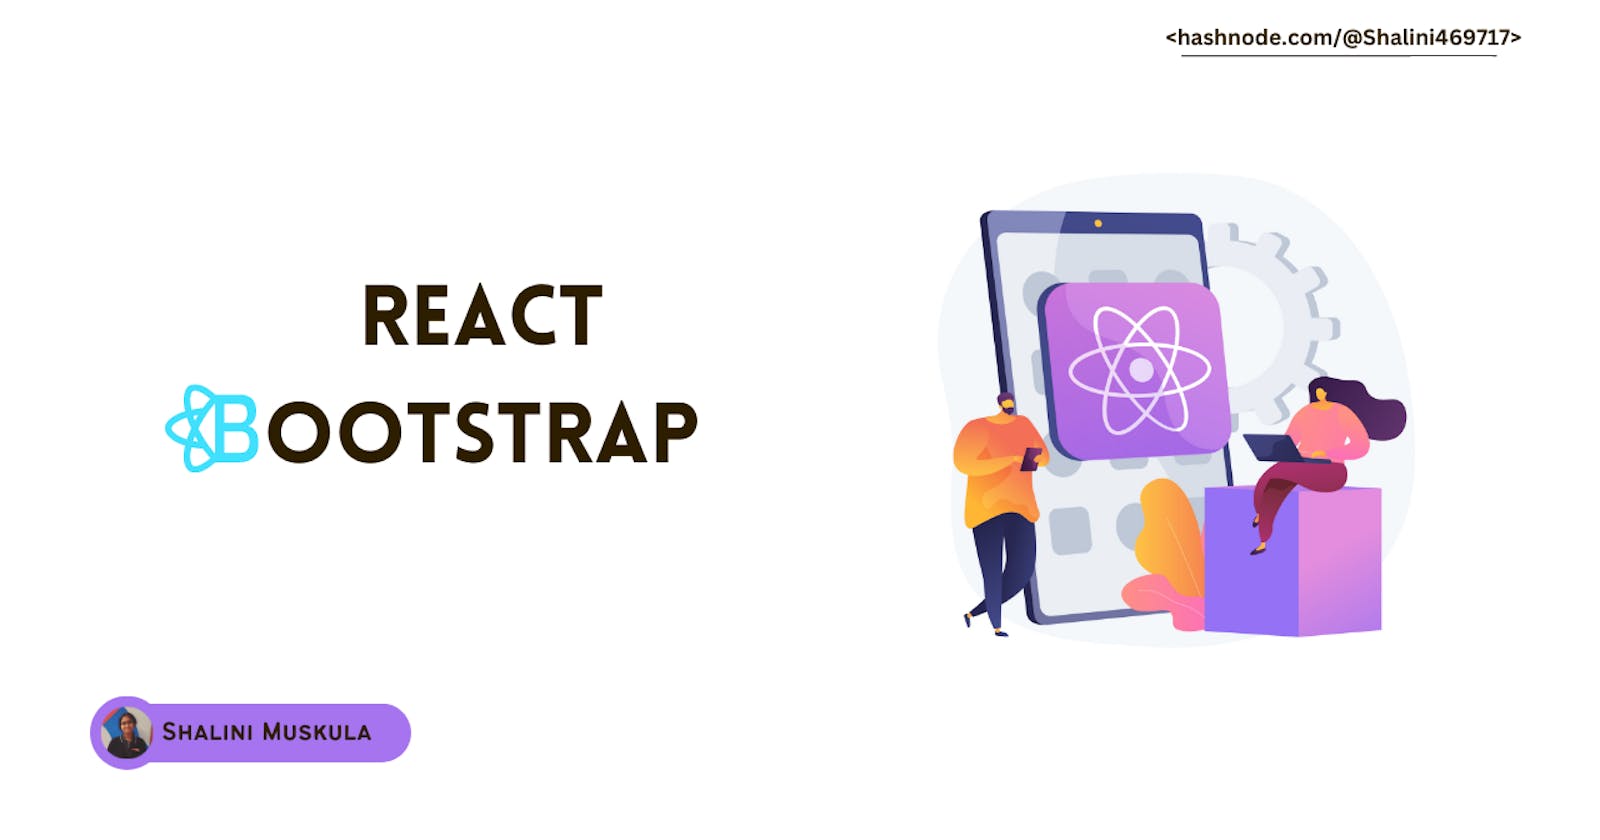 How to use Bootstrap in React?